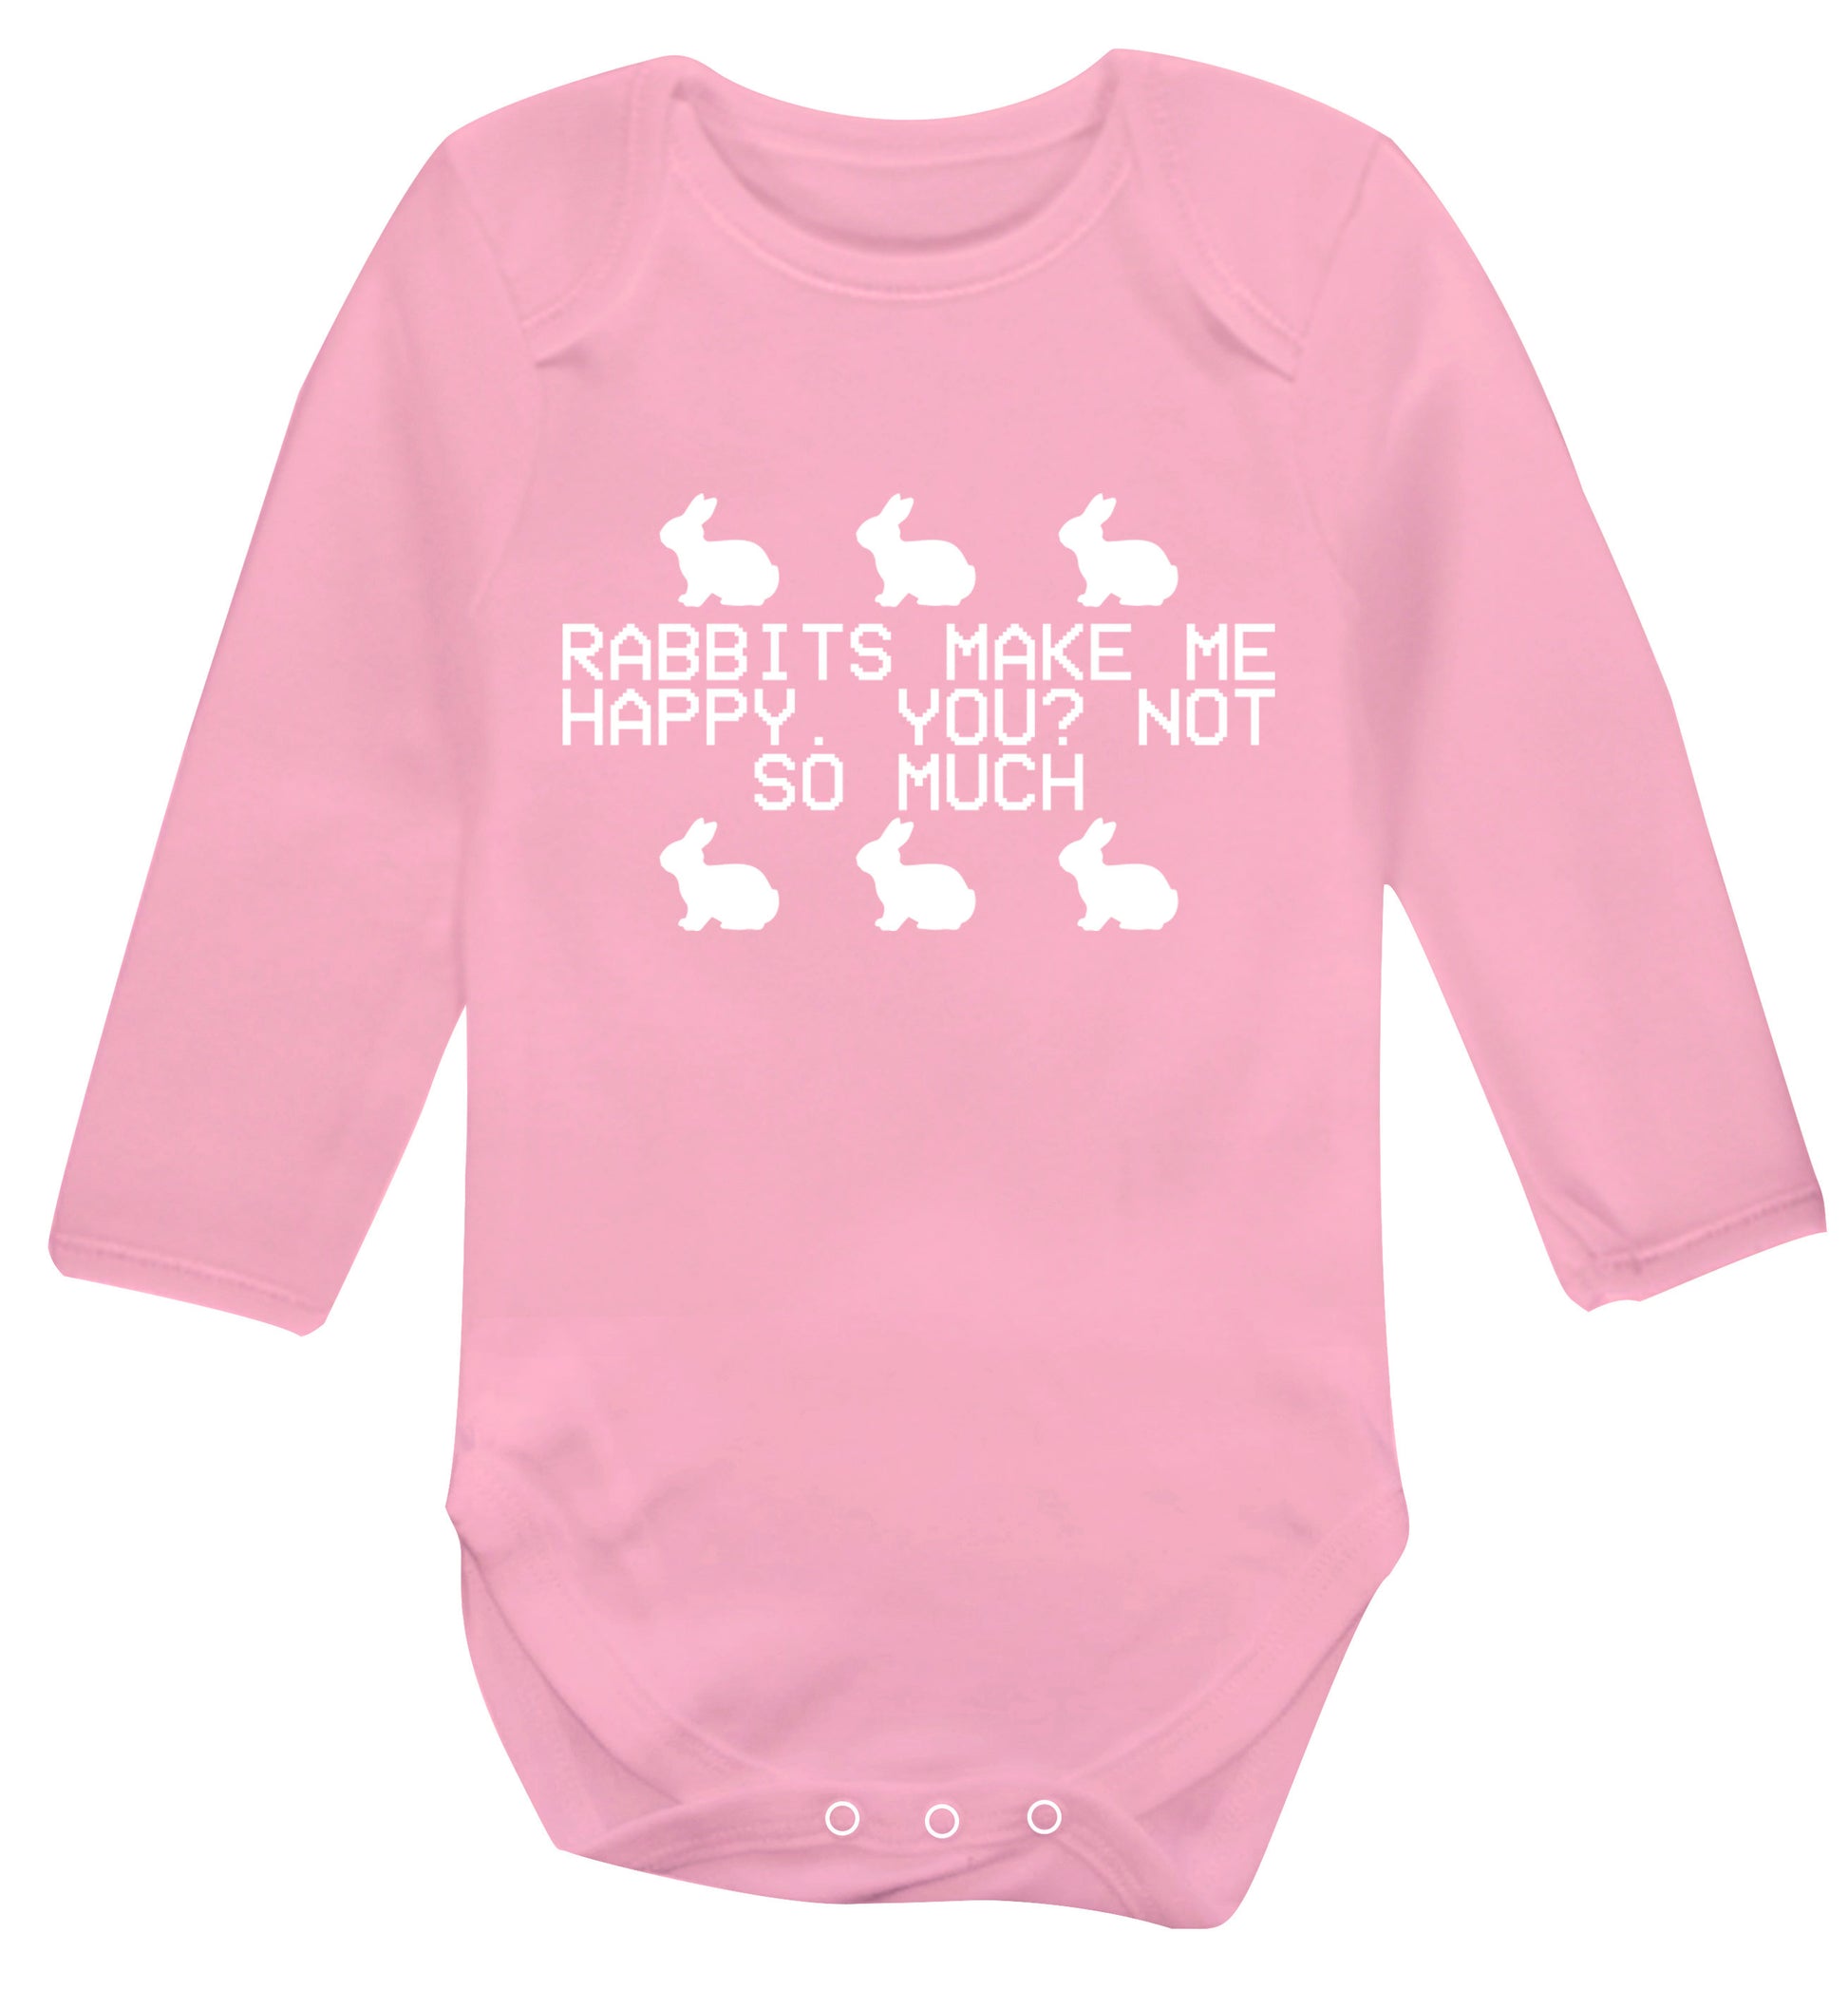 Rabbits make me happy, you not so much Baby Vest long sleeved pale pink 6-12 months